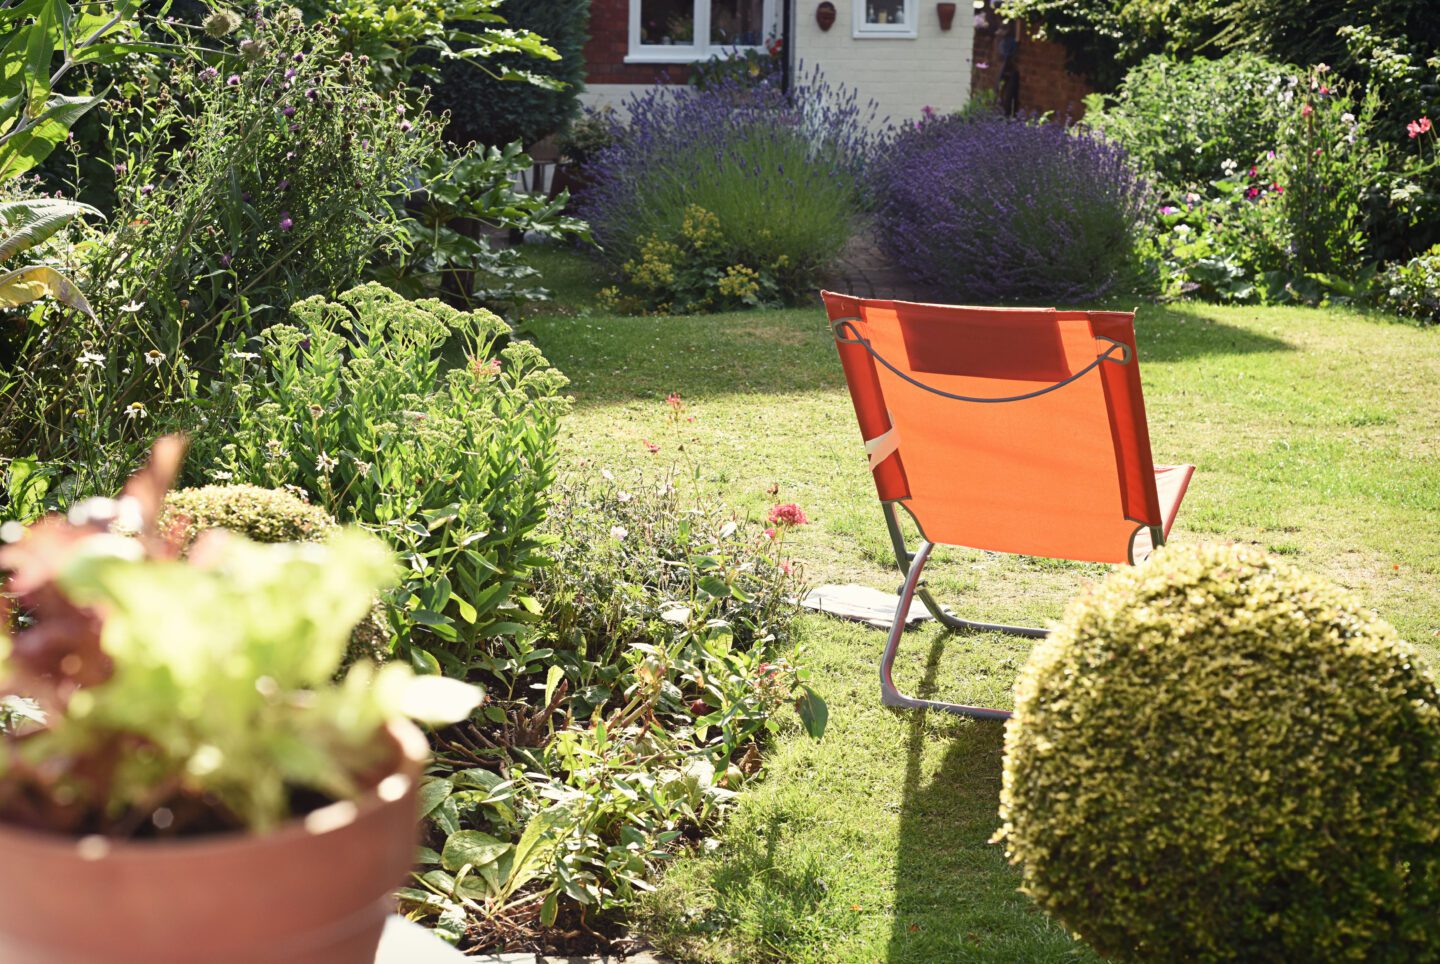 Get your garden ready for summer